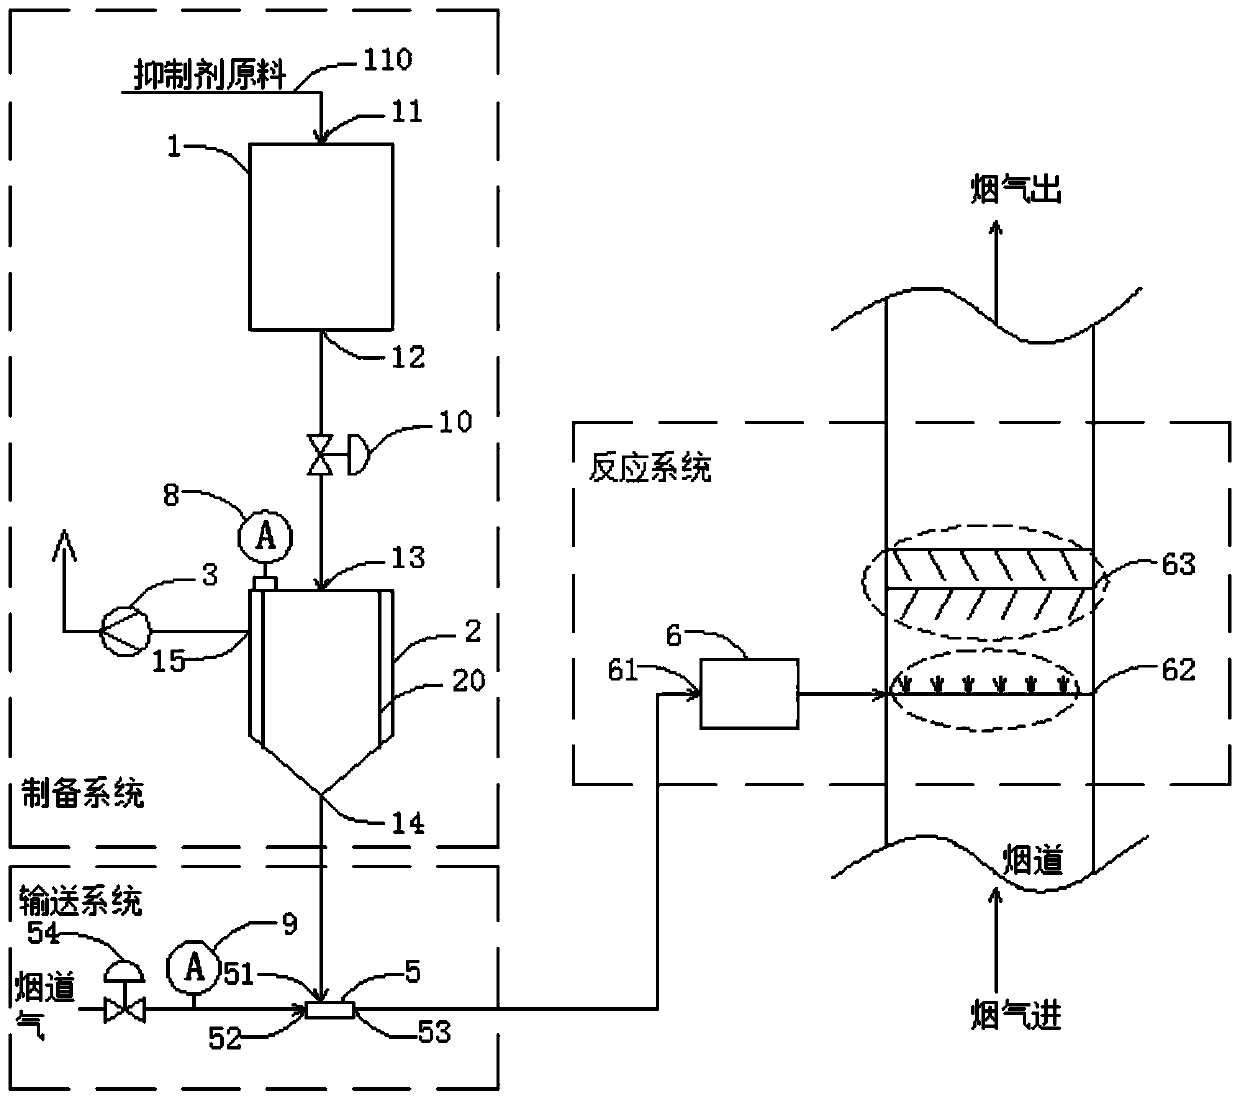 Equipment inhibiting generation of dioxin in incineration flue gas and use method of equipment